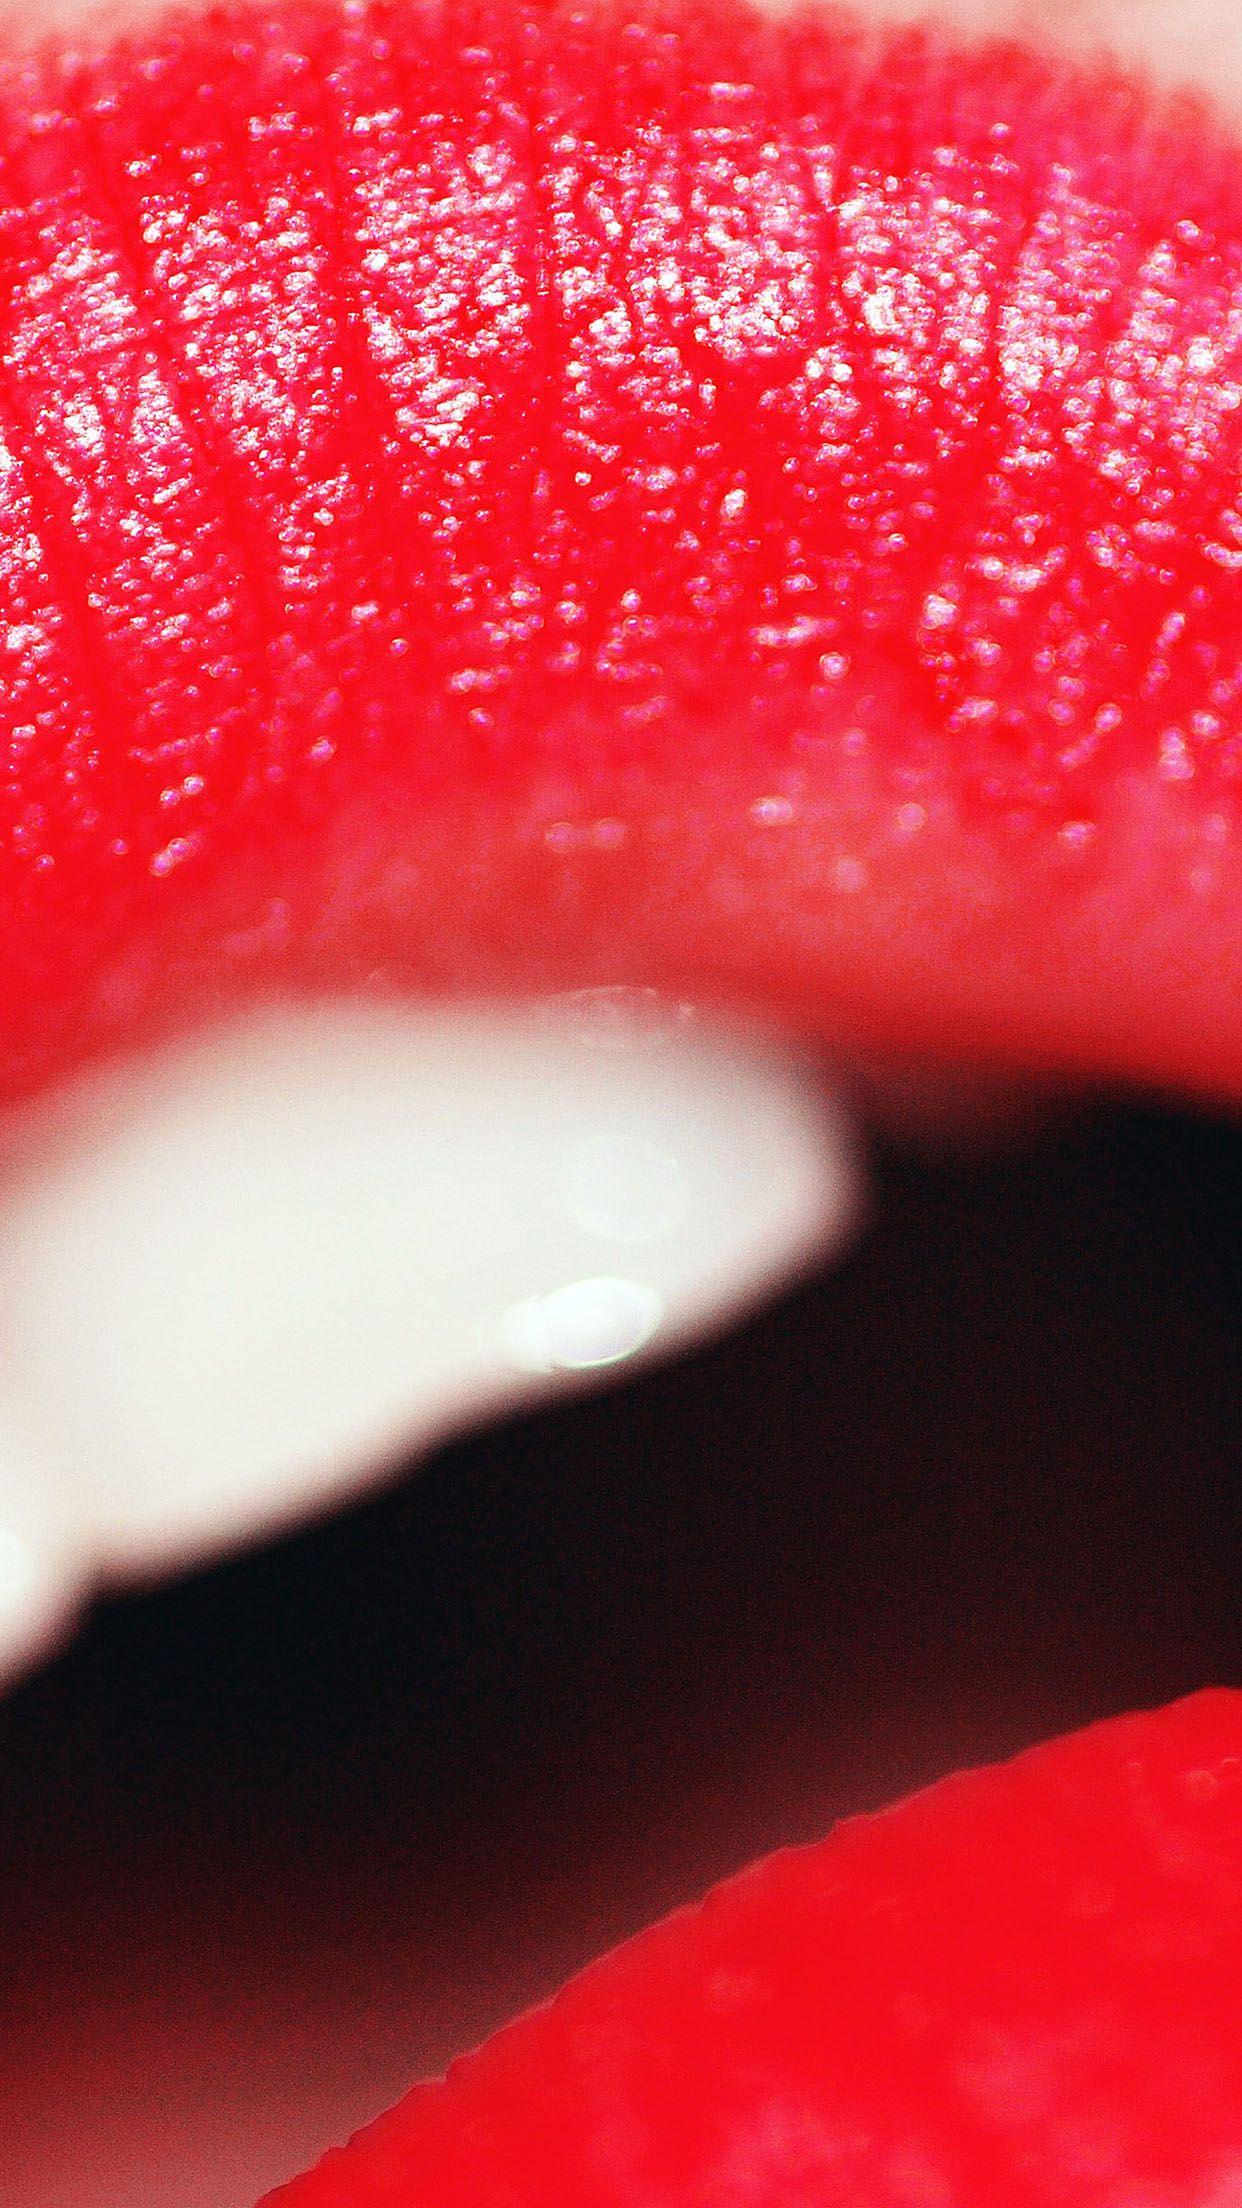 Lips Macro Android Wallpaper free download